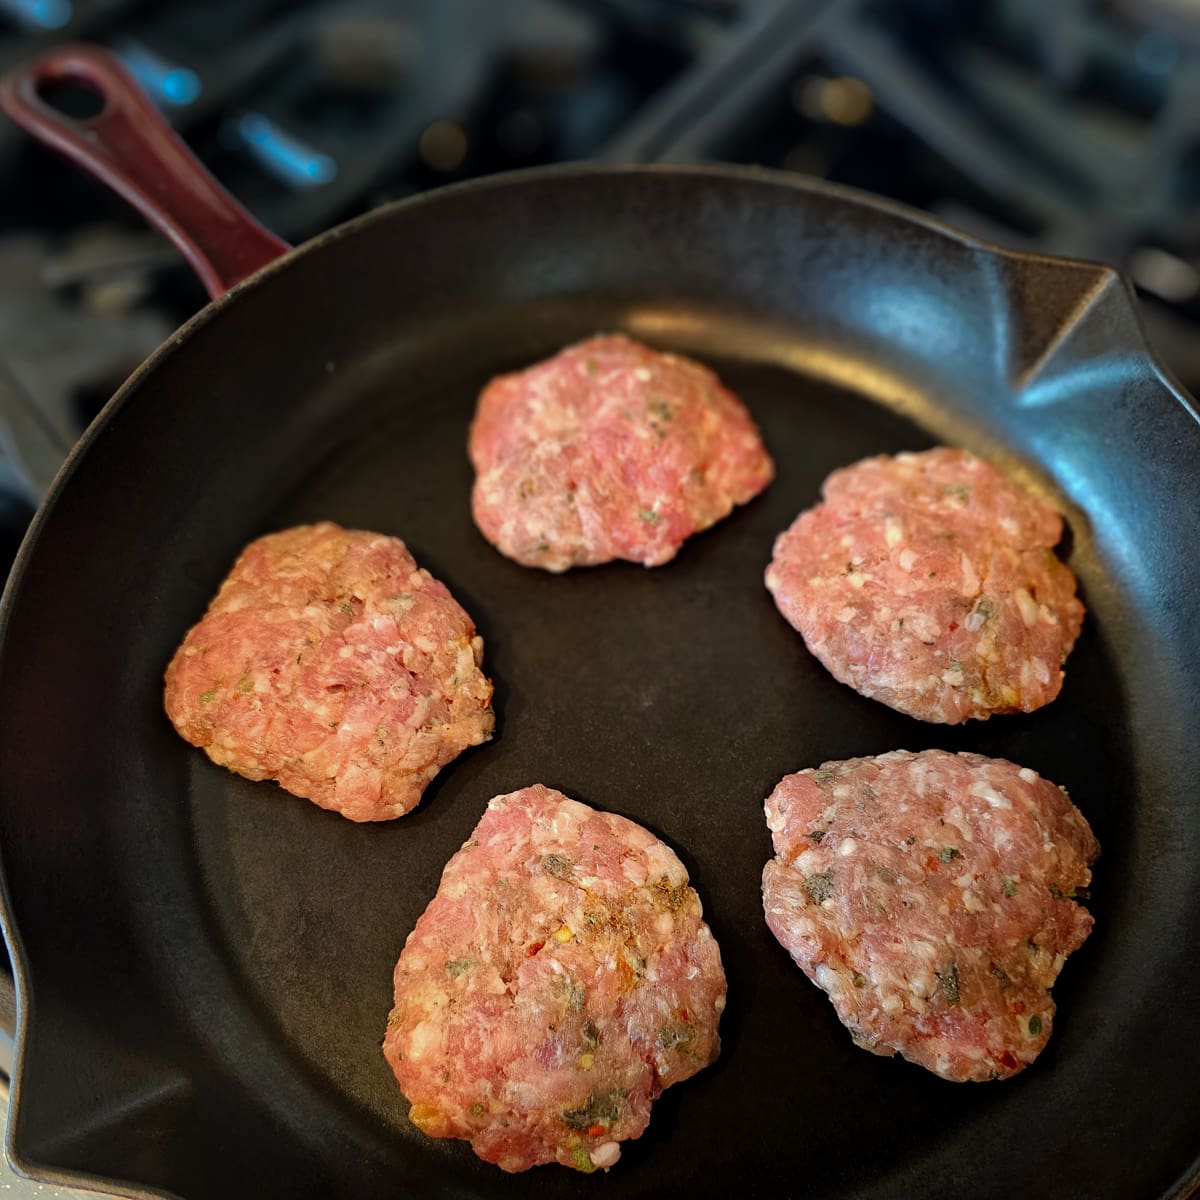 Homemade sausage cooking in a skillet.